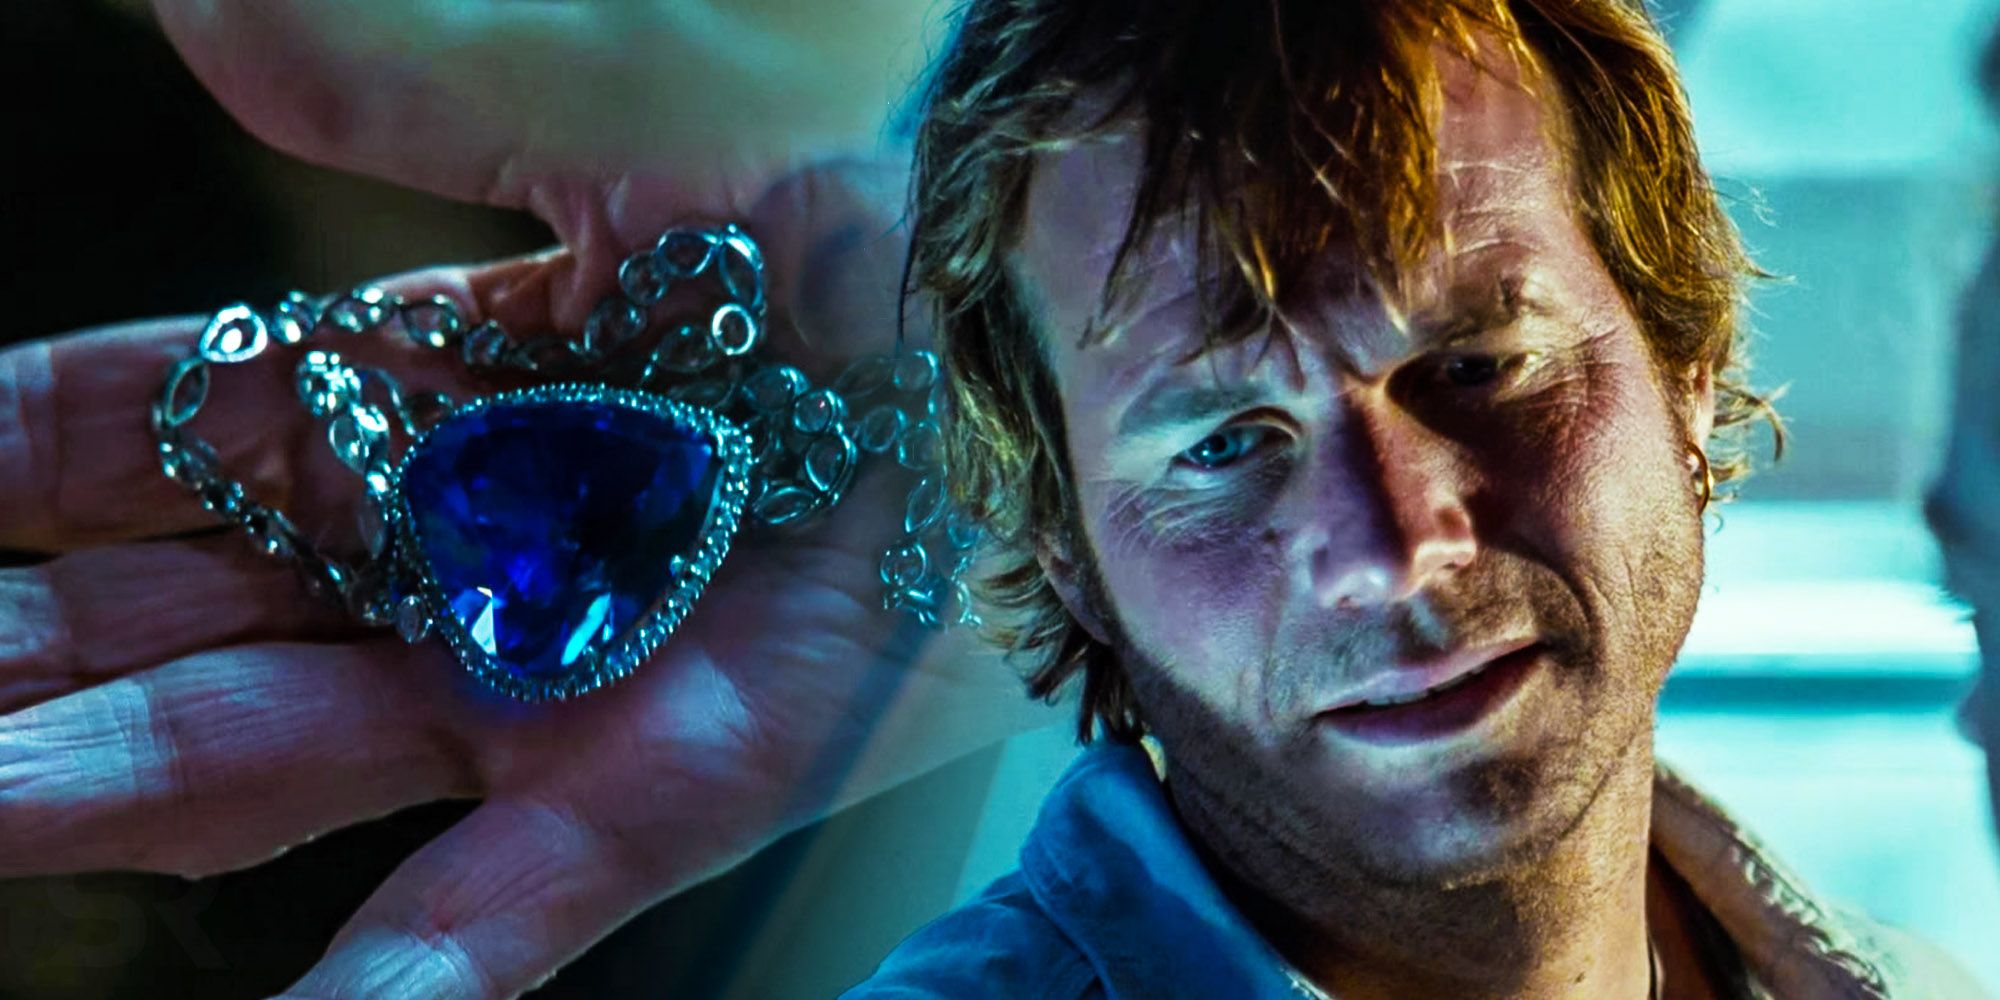 Titanic True Story: The Real Diamond Rose’s Heart Of The Ocean Necklace Is Based On